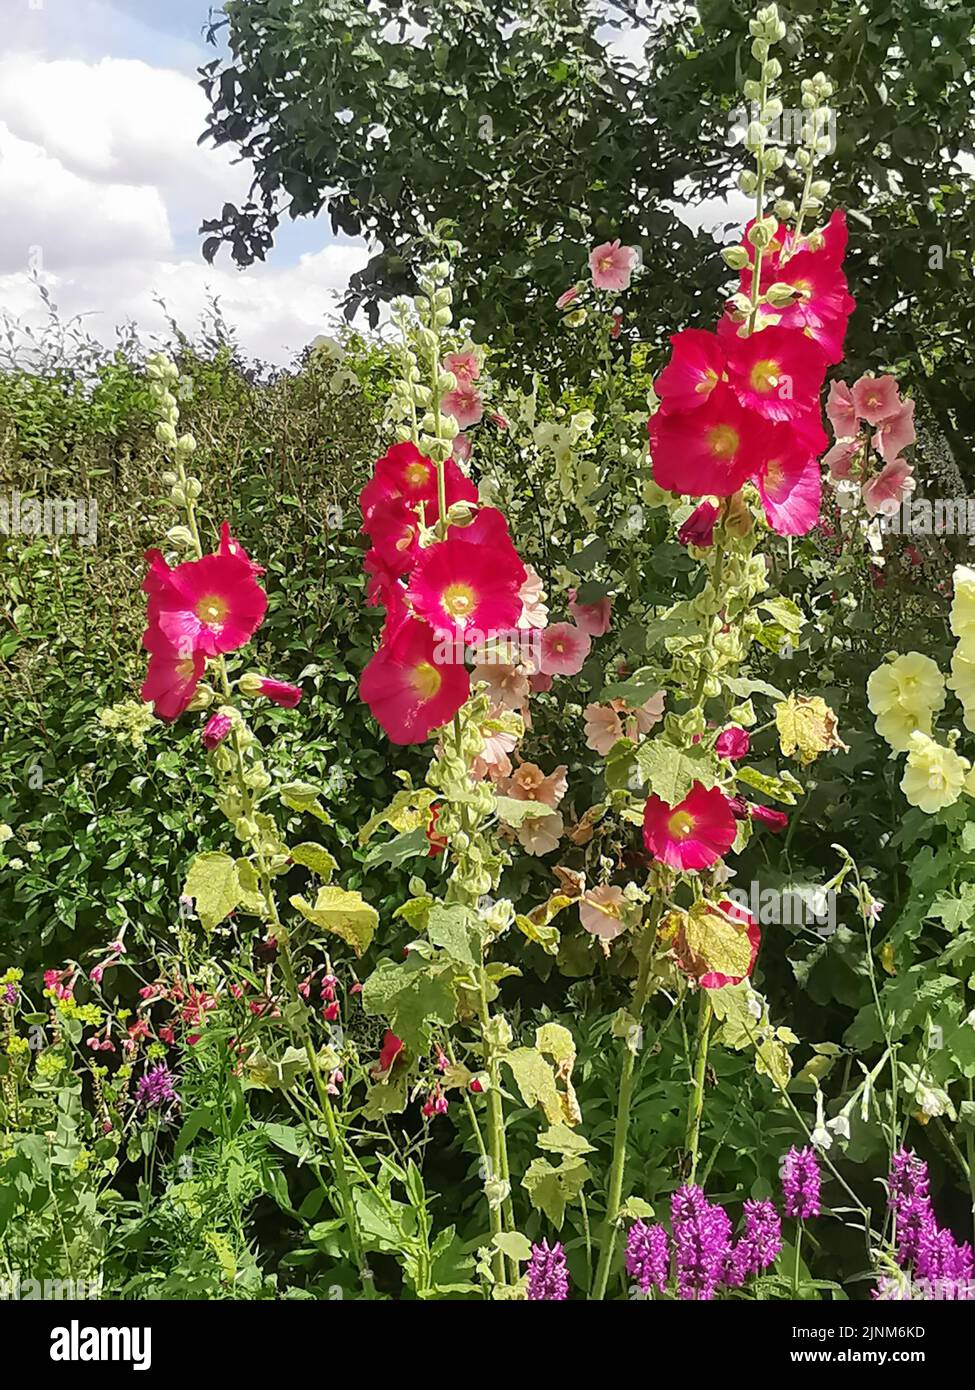 Bright red hollyhocks in flowerbed in English cottage garden setting Stock Photo